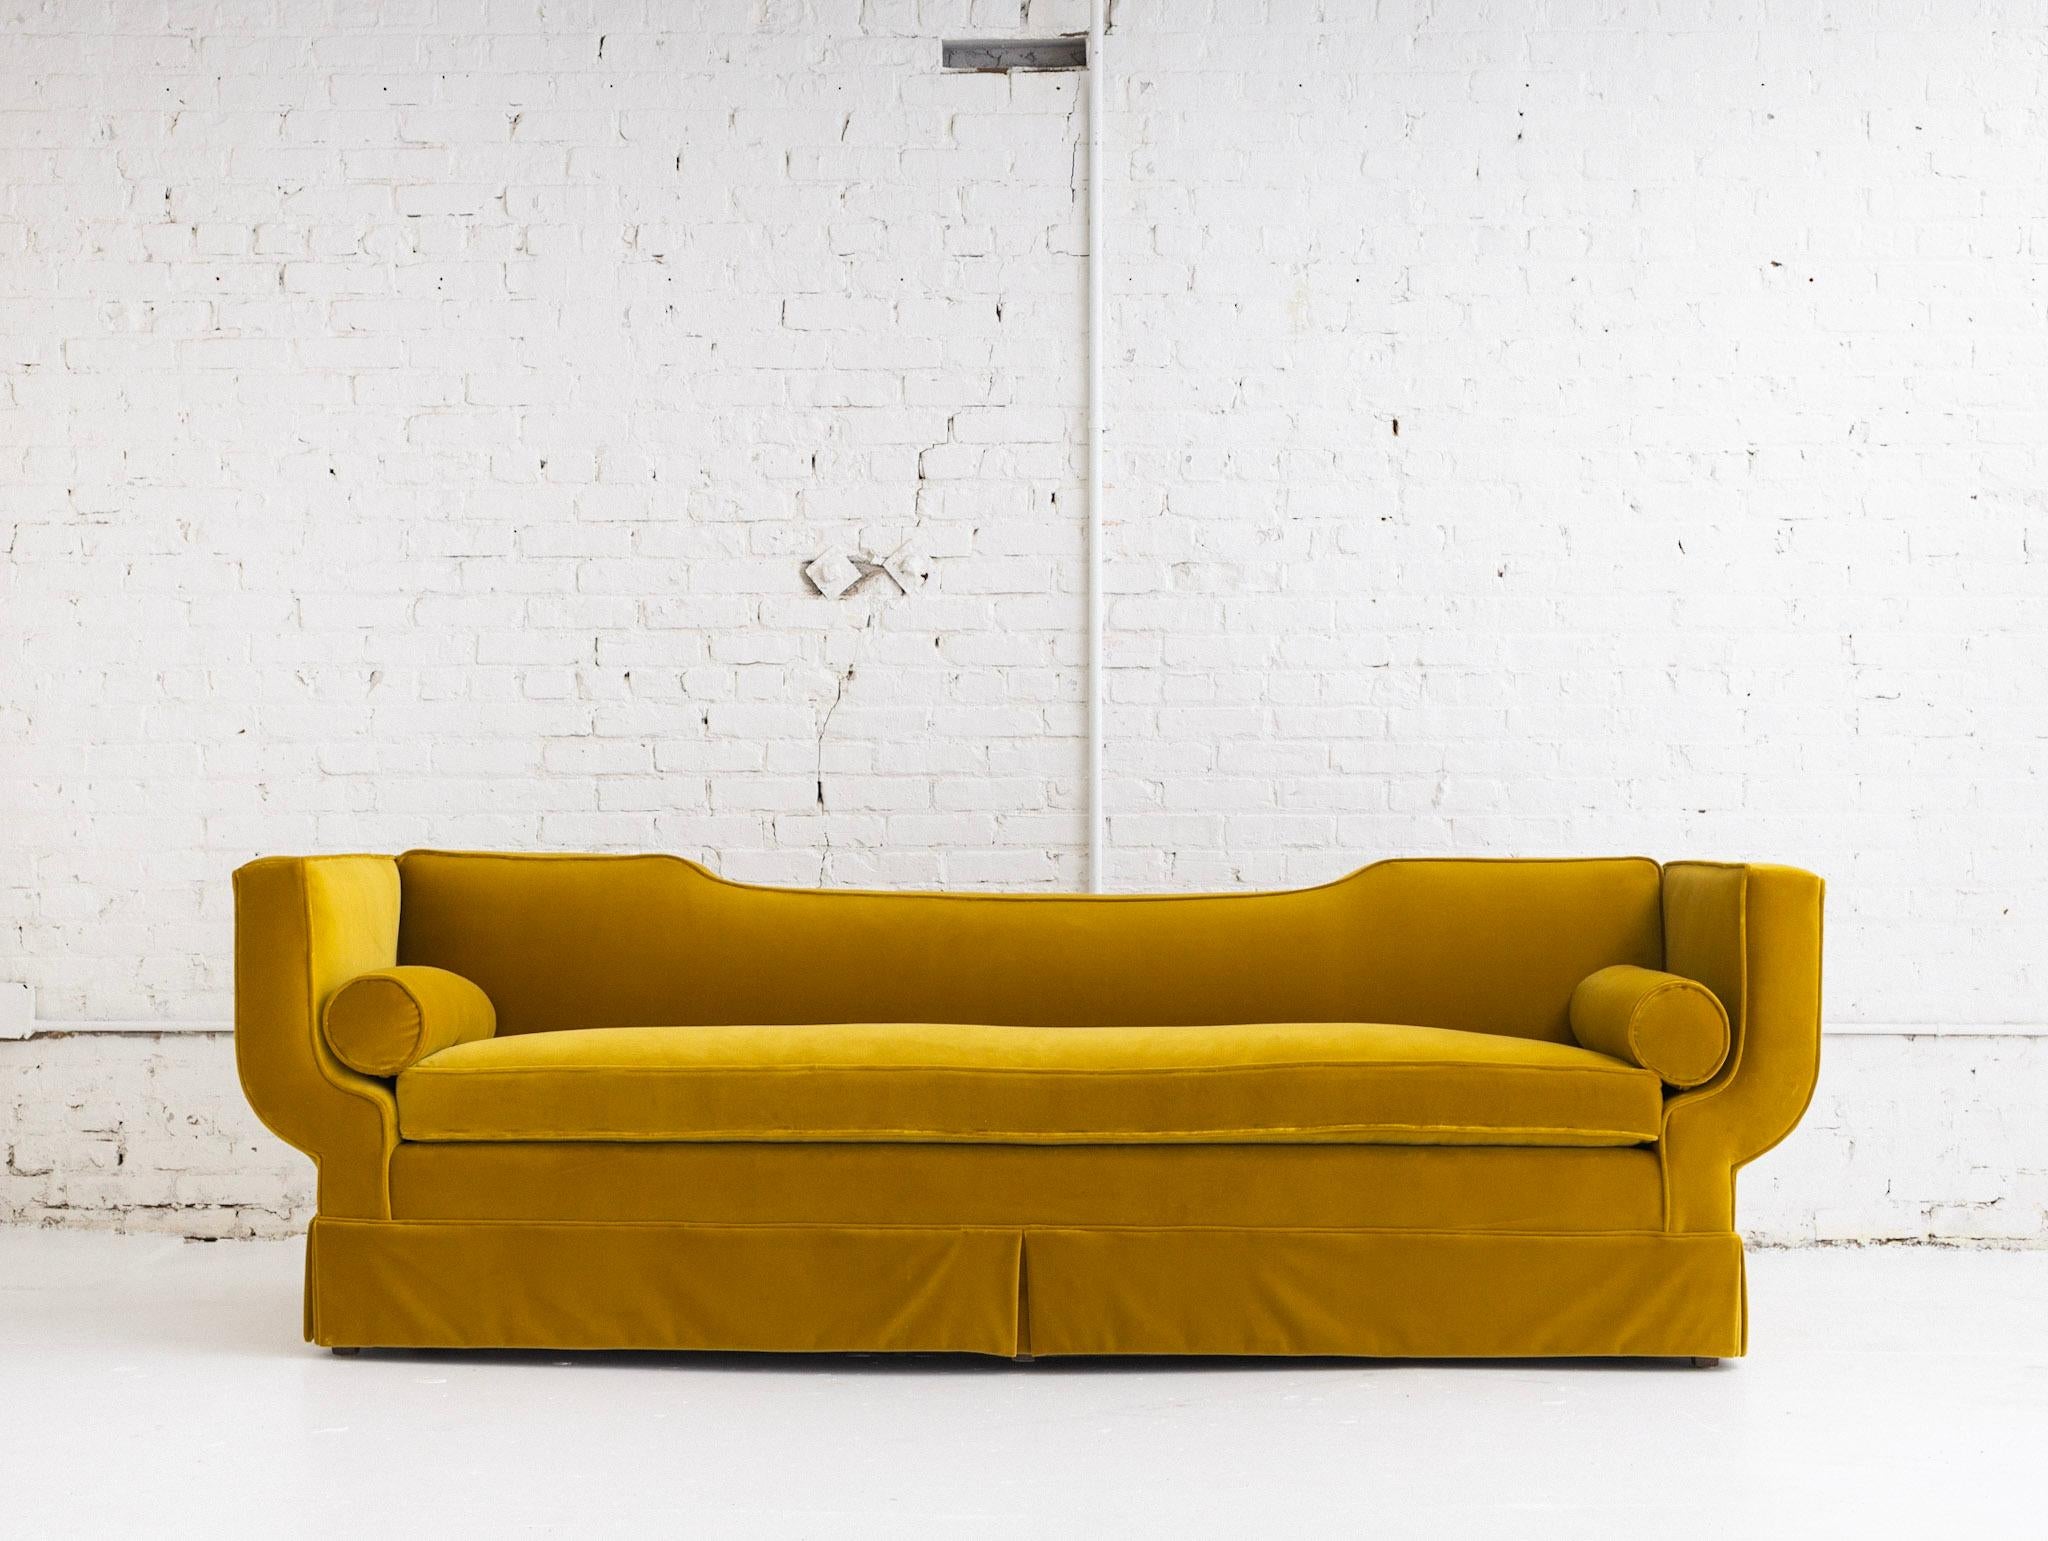 A mid century sofa in the style of James Mont. Newly upholstered in yellow velvet. Gondola silhouette with bolster pillows.